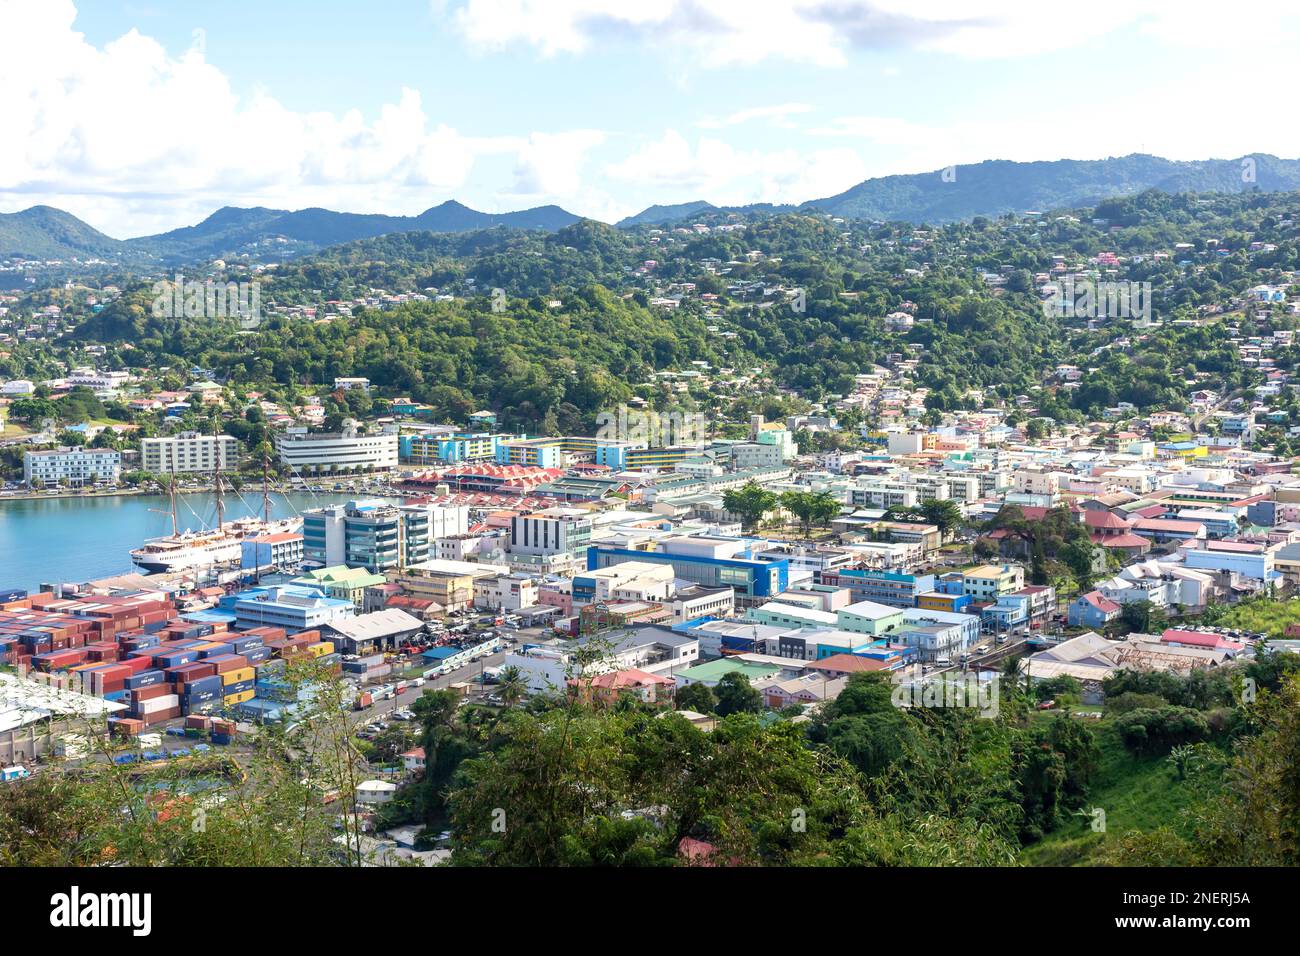 View of city and port from Morne Fortune Lookout, Castries, Saint Lucia, Lesser Antilles, Caribbean Stock Photo